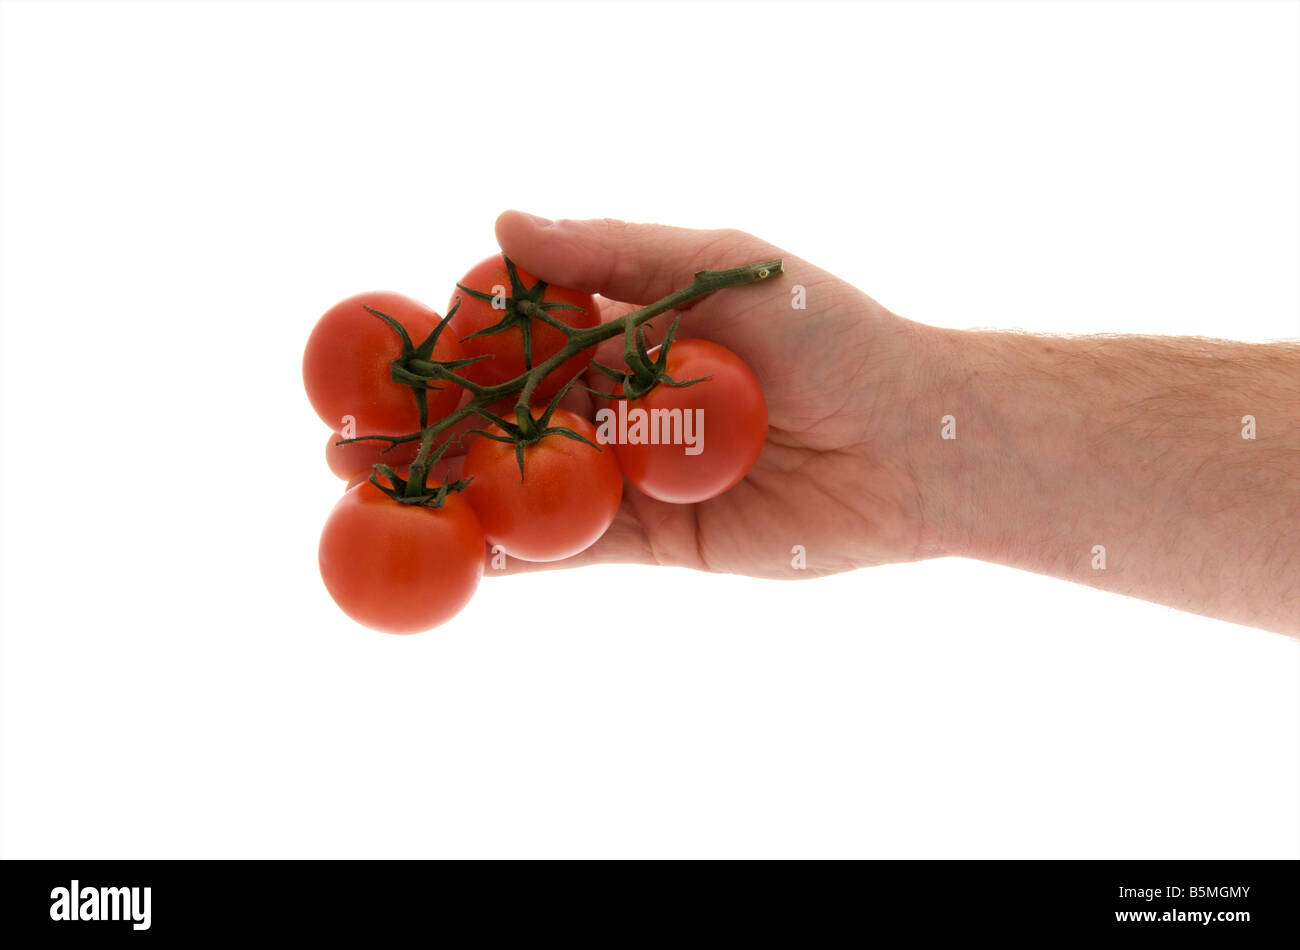 mans male right outstretched hand holding vine grown tomatoes against a white background Stock Photo